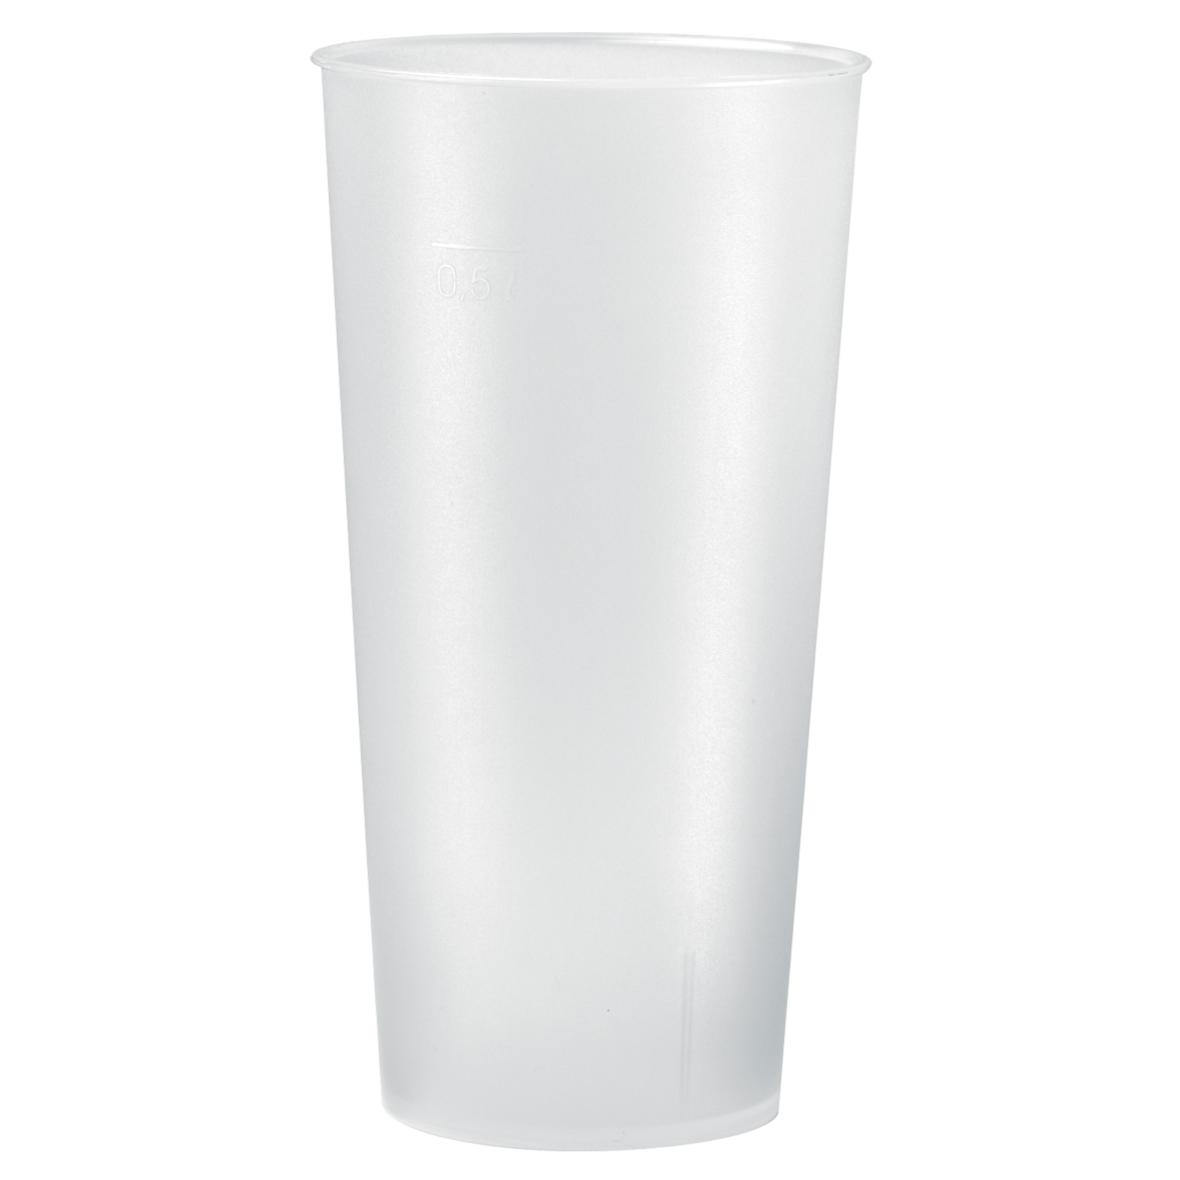 This is a transparent measuring cup from Appleby, which includes a filling level. It holds up to 0.5 liters. - Darlington